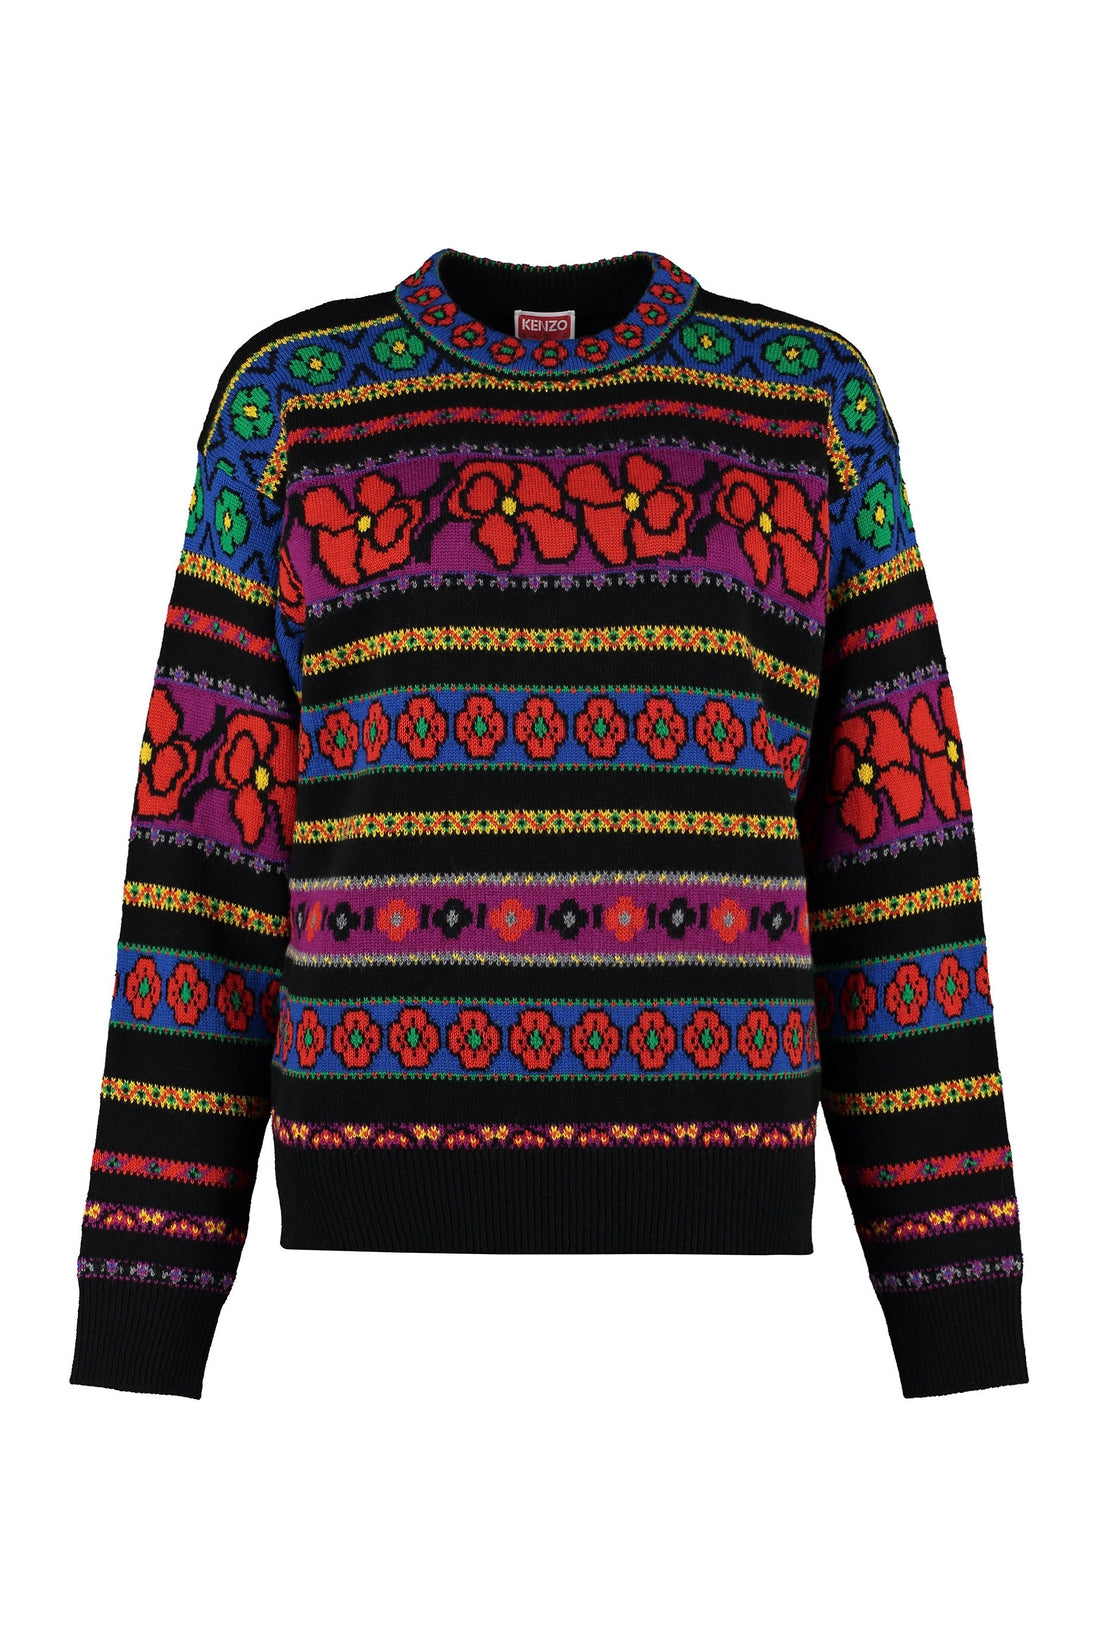 Kenzo-OUTLET-SALE-Crew-neck wool sweater-ARCHIVIST